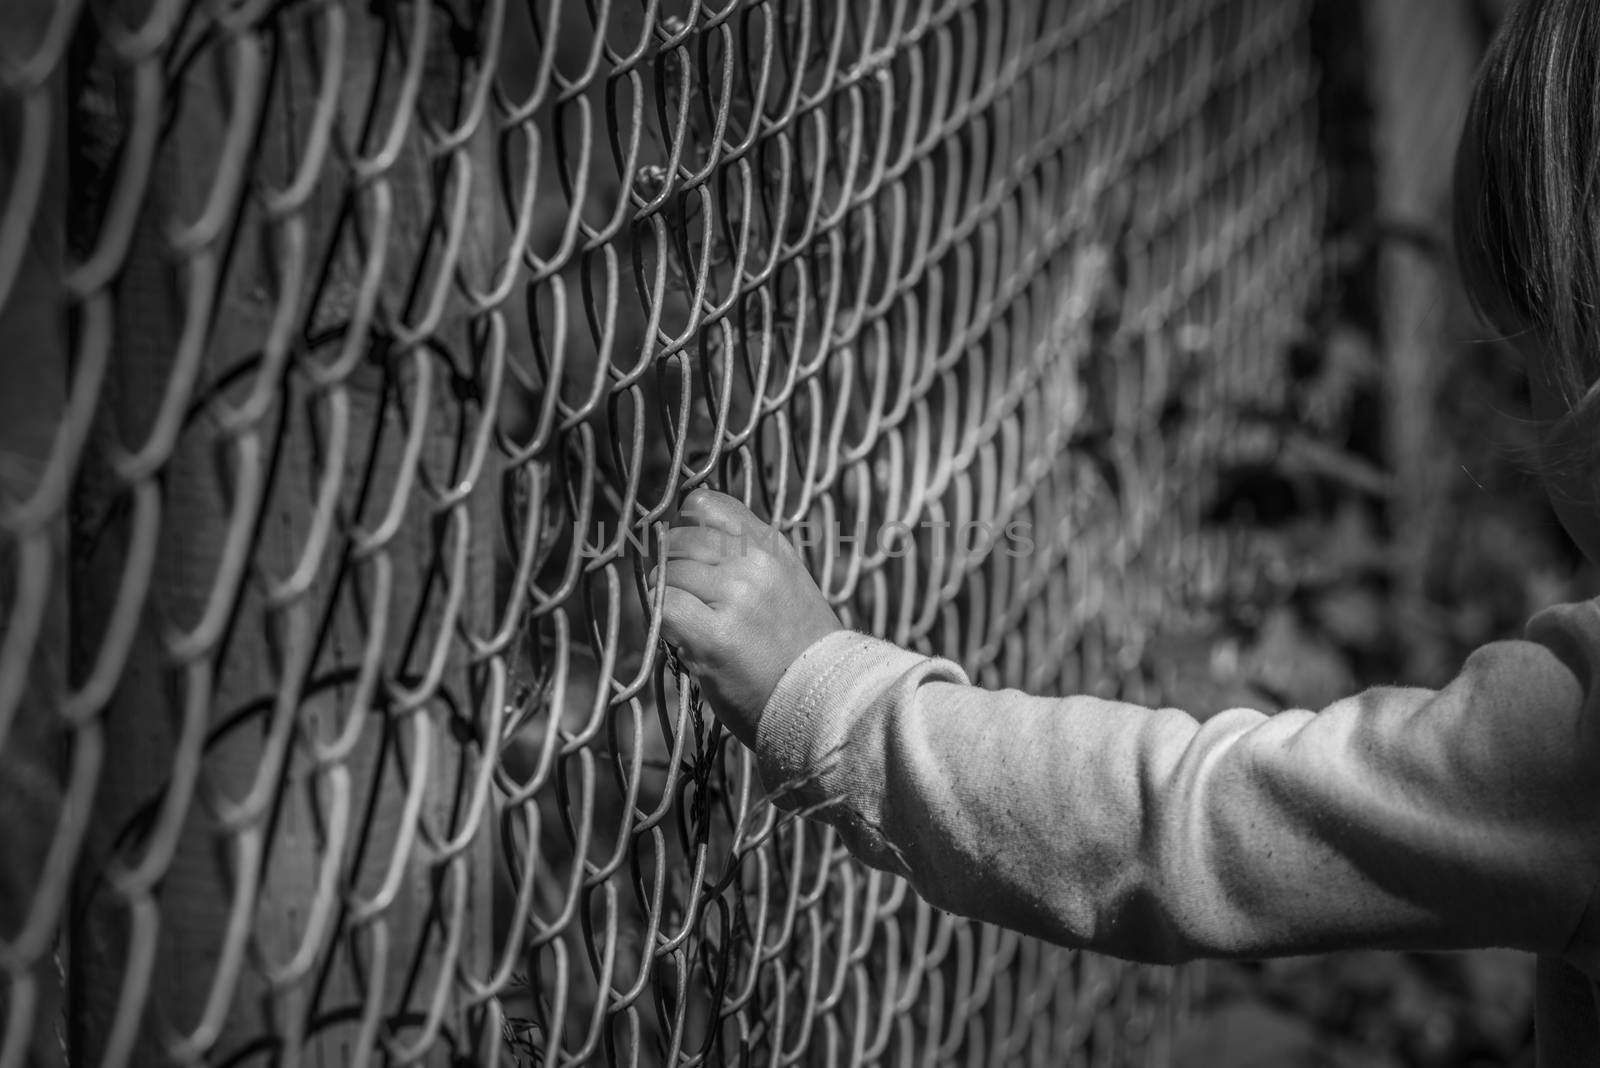 Black and white image of a little girl hand grabbing a metal fence, depicting drama